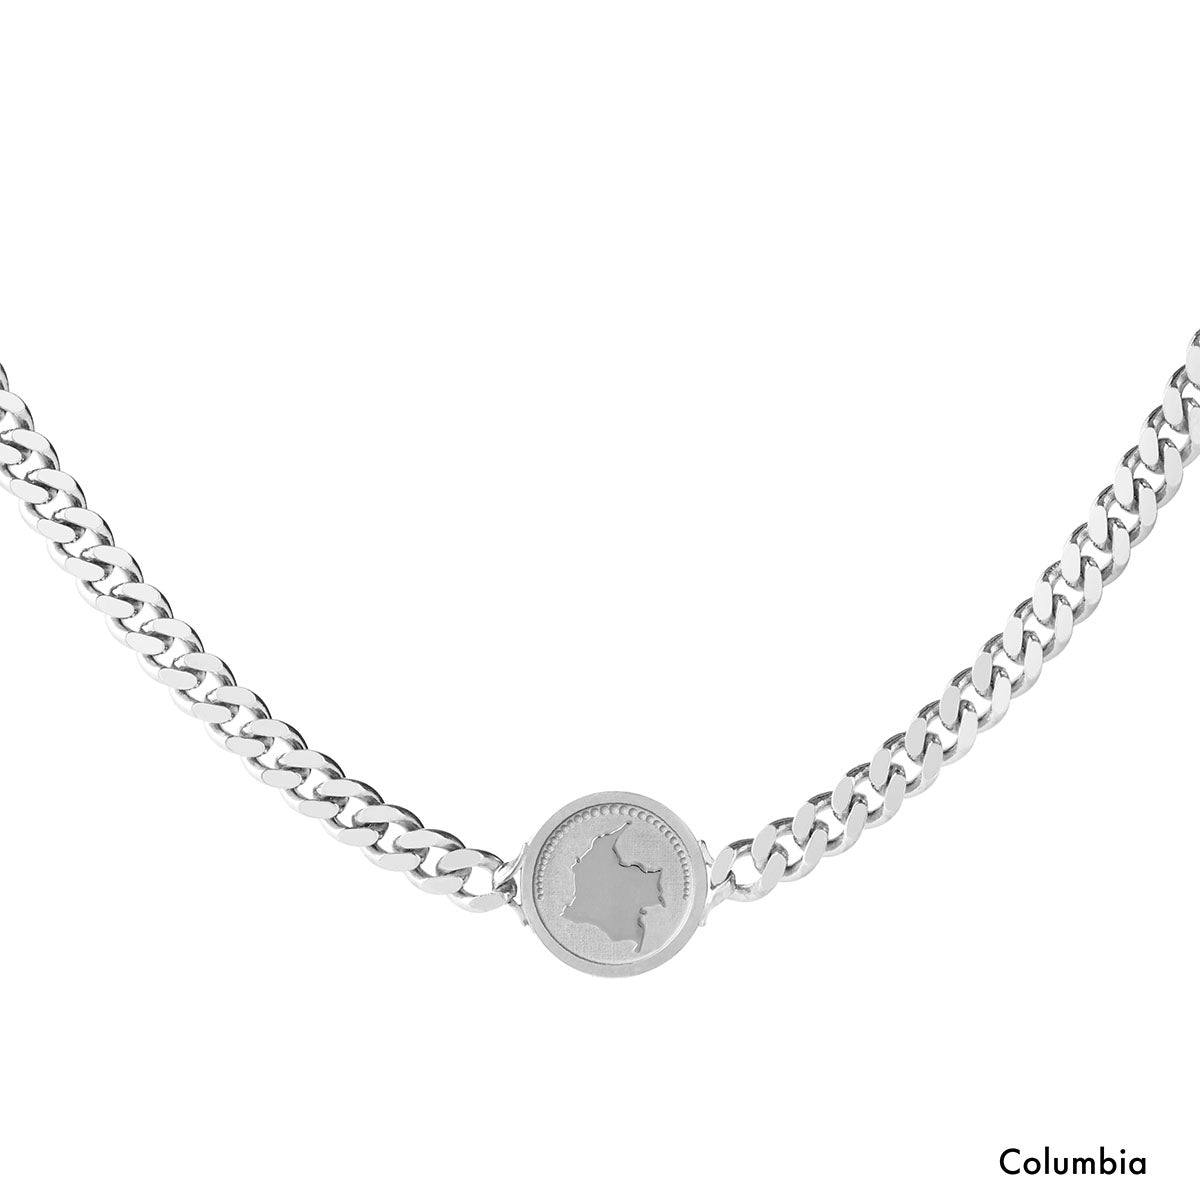 Retailer of 22kt white gold chunky chain jkc002 | Jewelxy - 120968